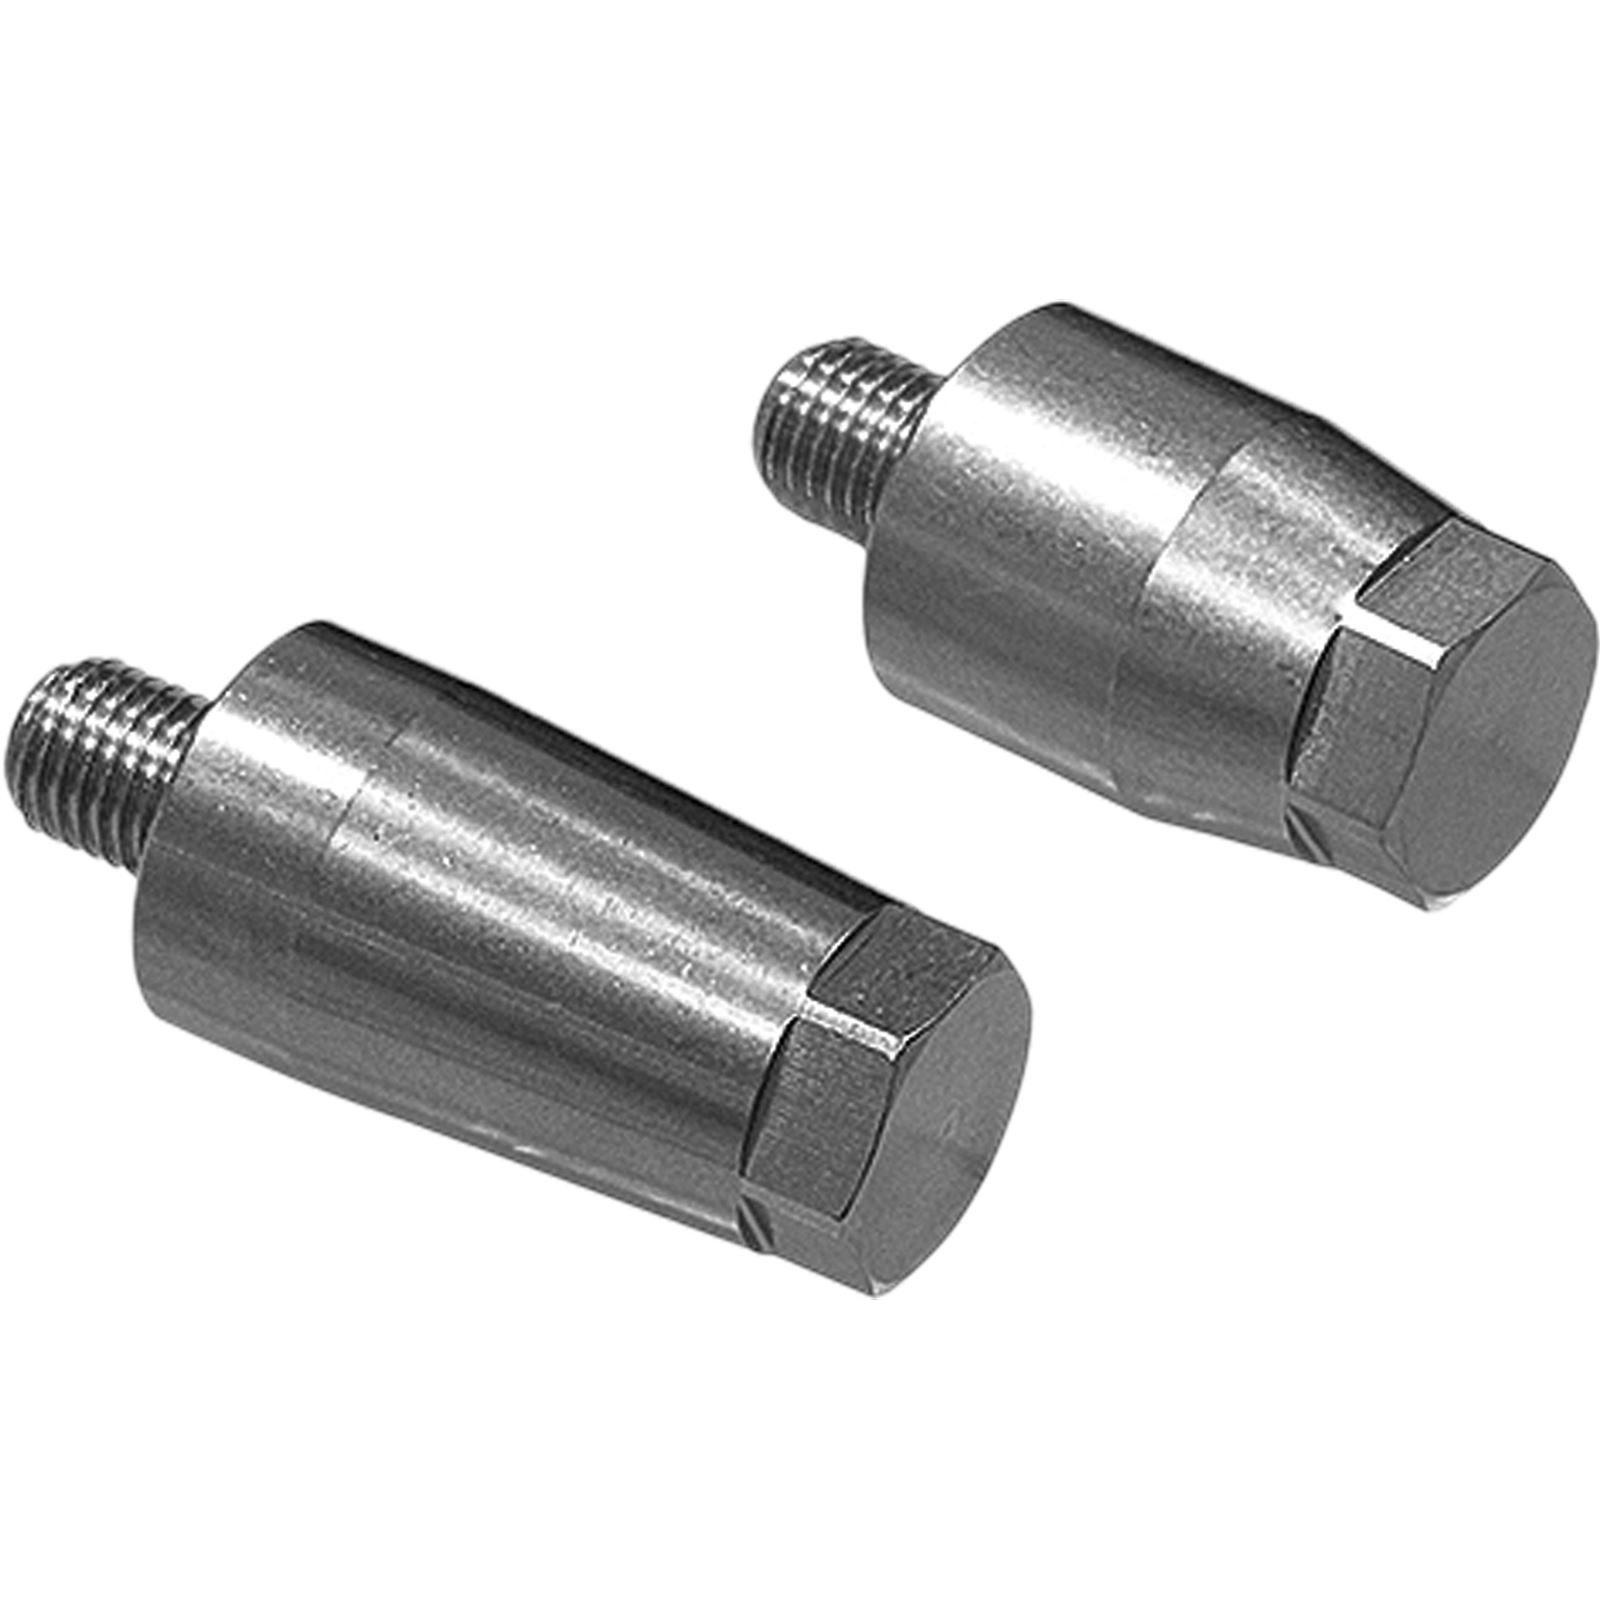 SPI Belt Drive Pulley Guide Tool